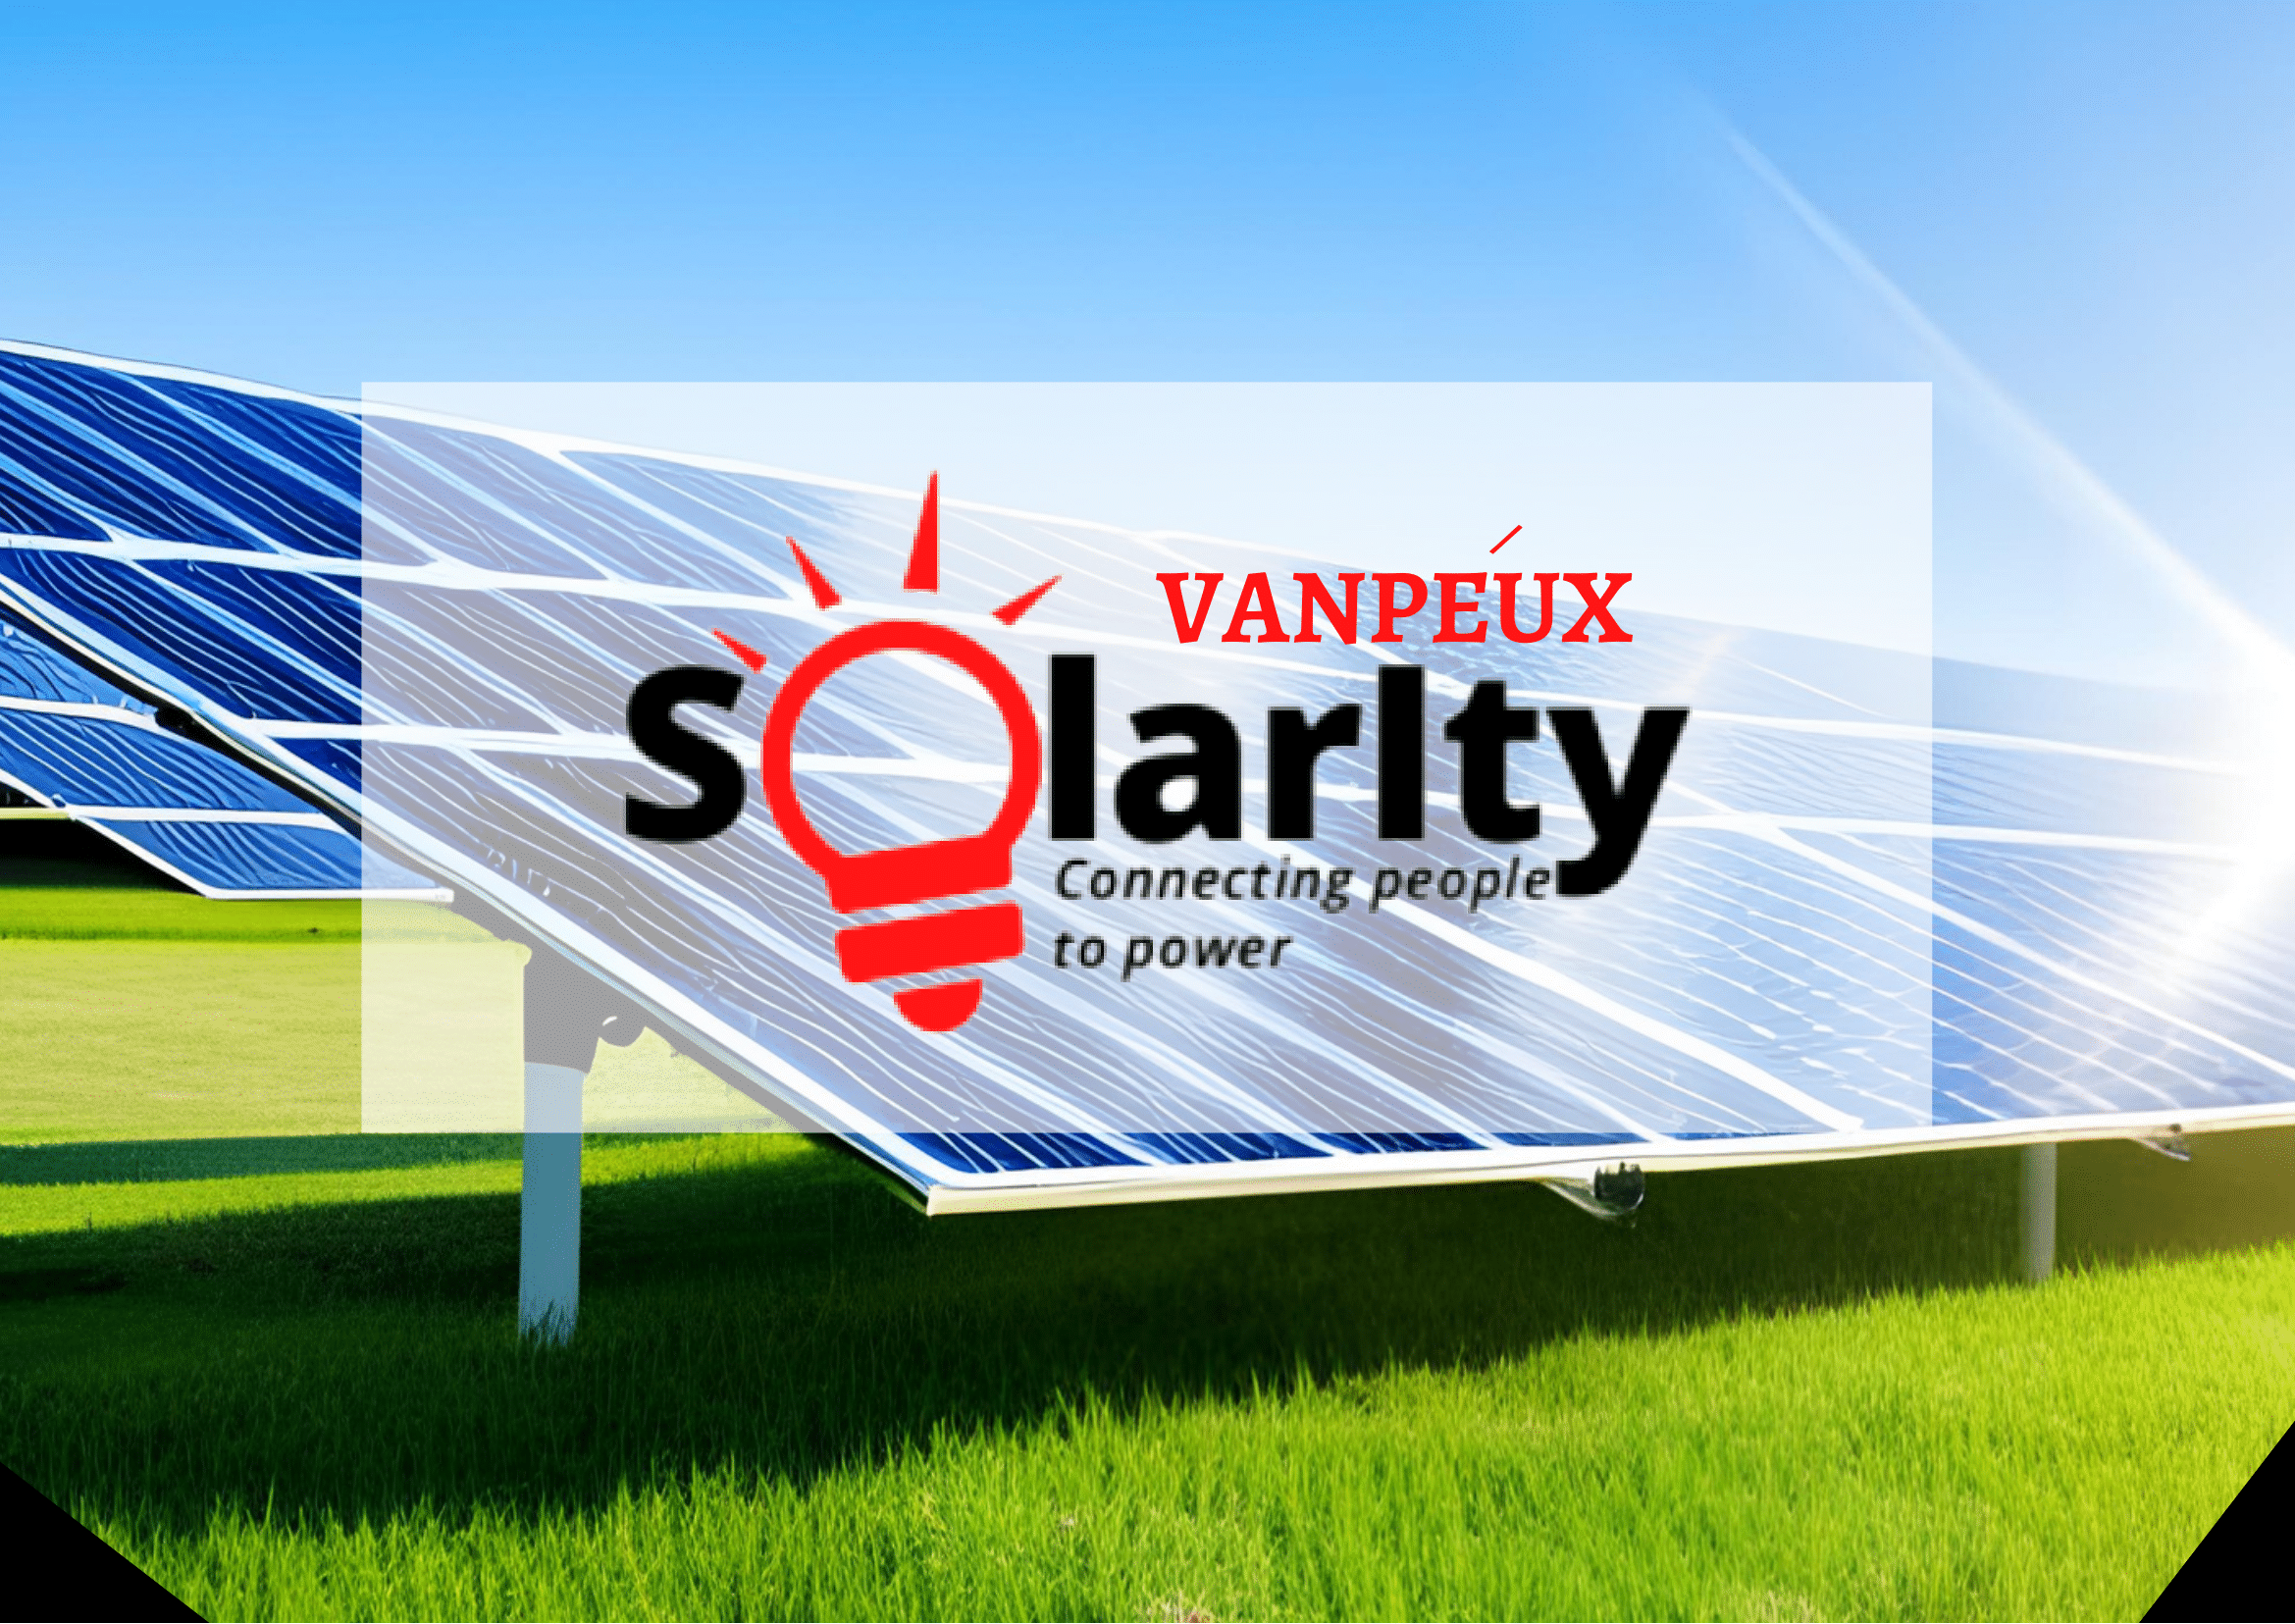 Benefits of going on solar energy in Lagos